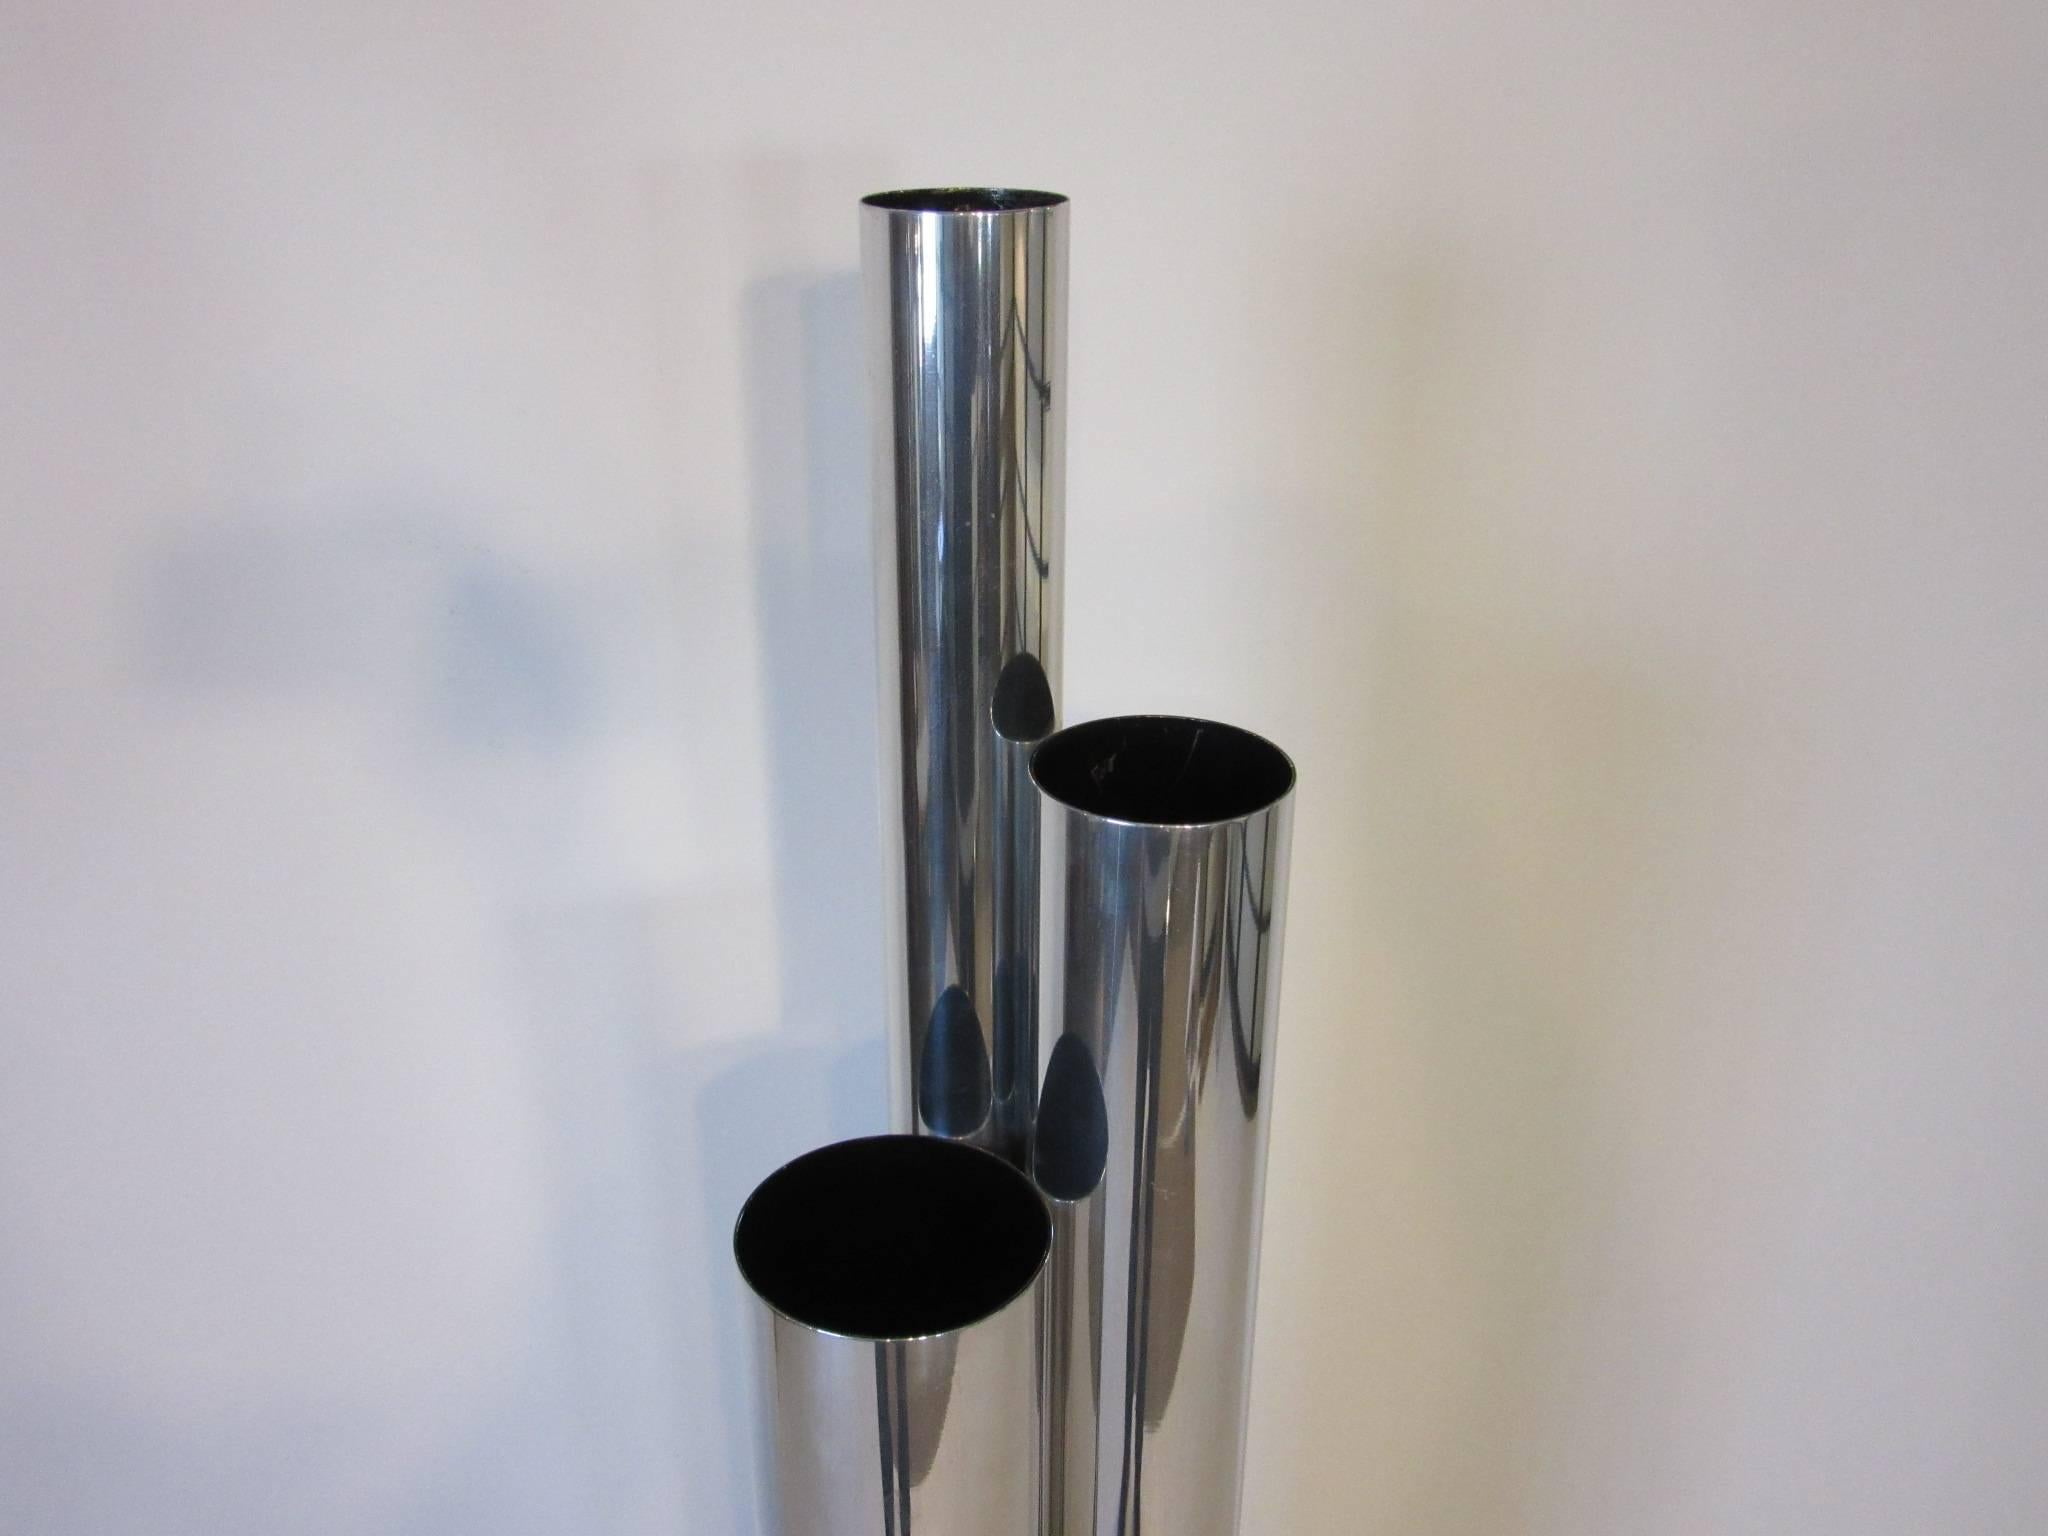 A anodized aluminium tubed floor or table lamp with polished tubes in three different heights hence the name Skyscraper or Stalagmite lamp with a foot controlled on and off switch.